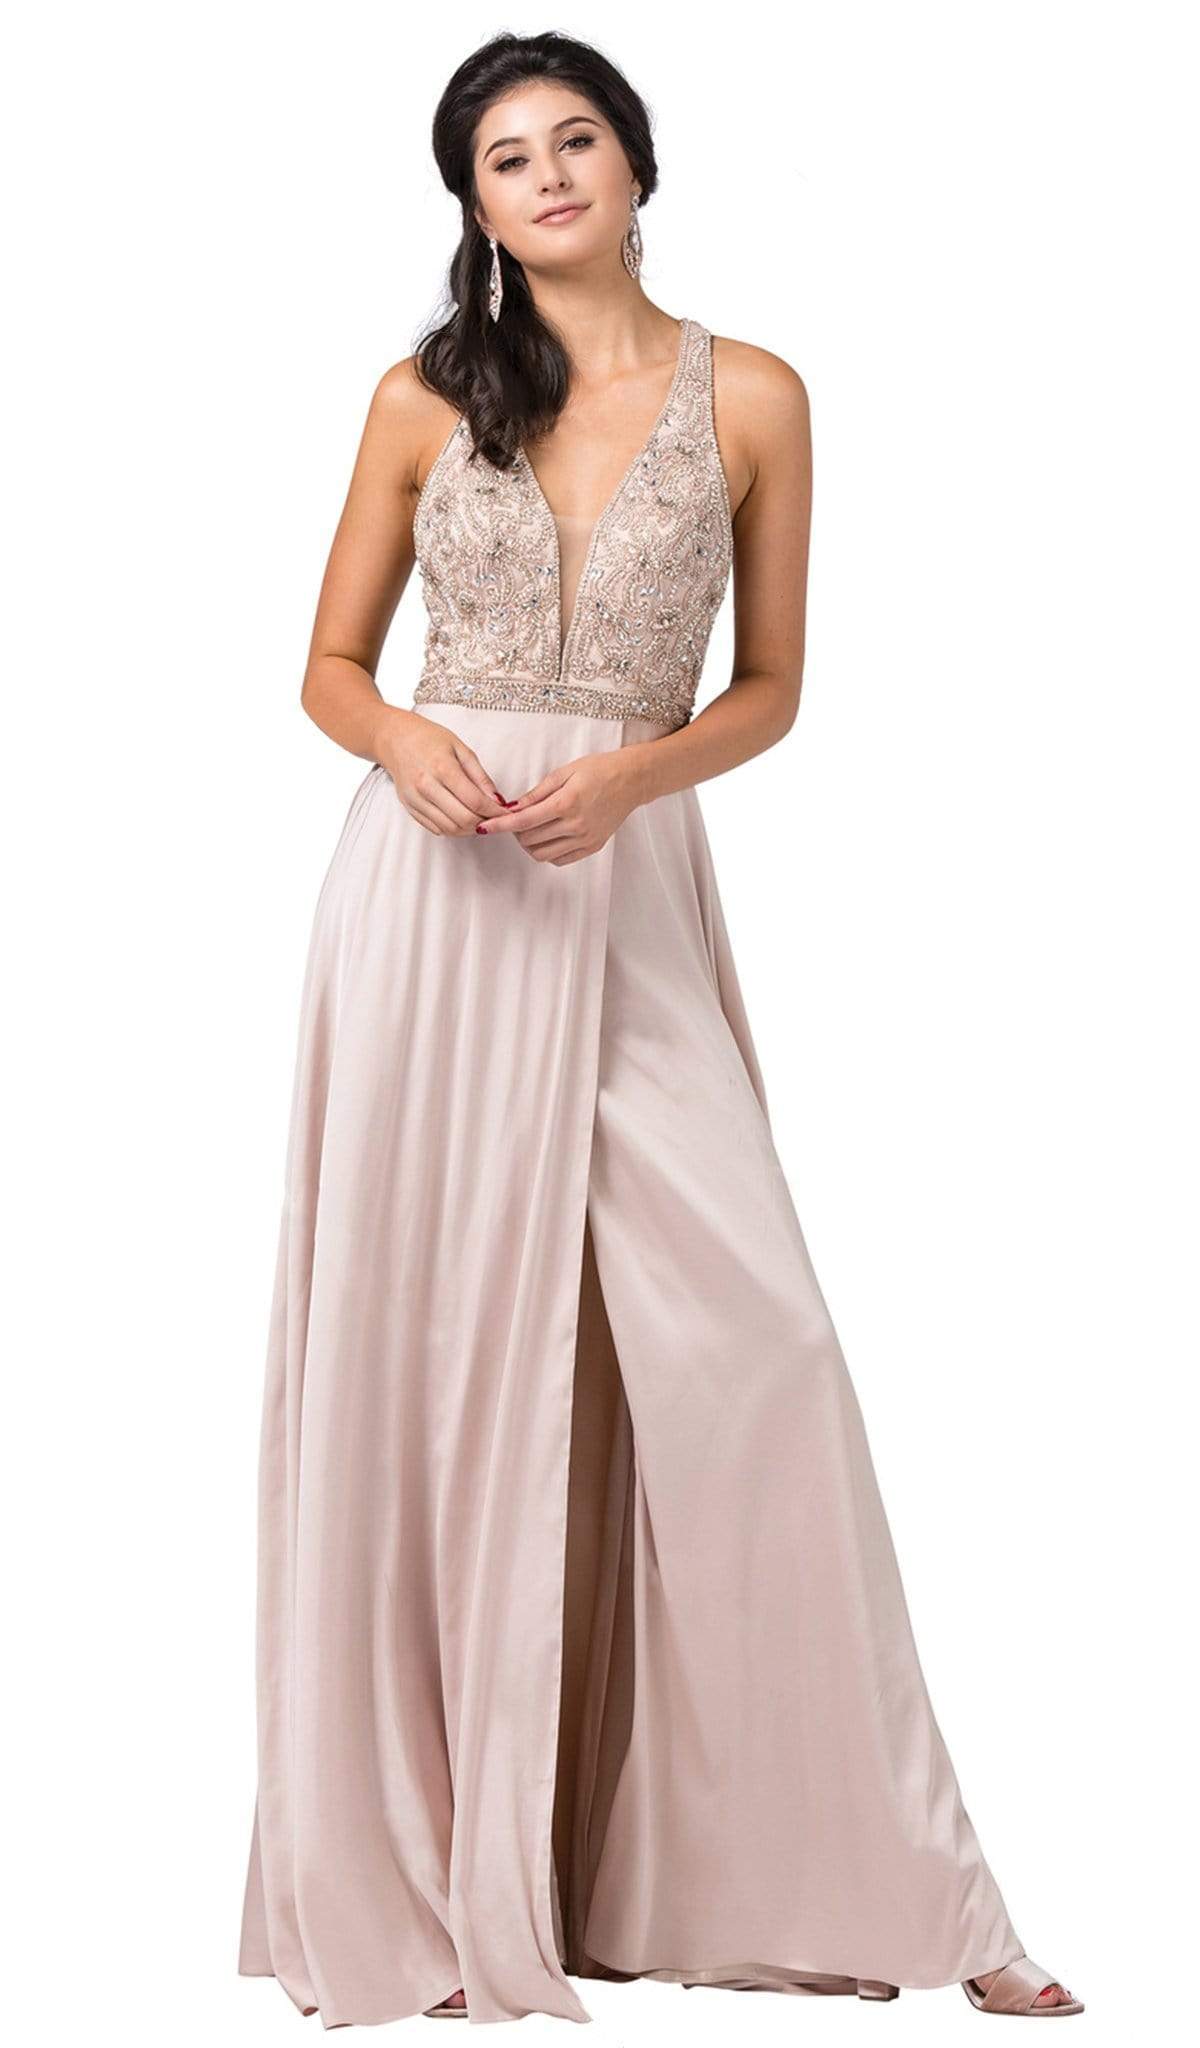 Image of Dancing Queen - 2527 Beaded Crisscrossed Back High Slit Gown